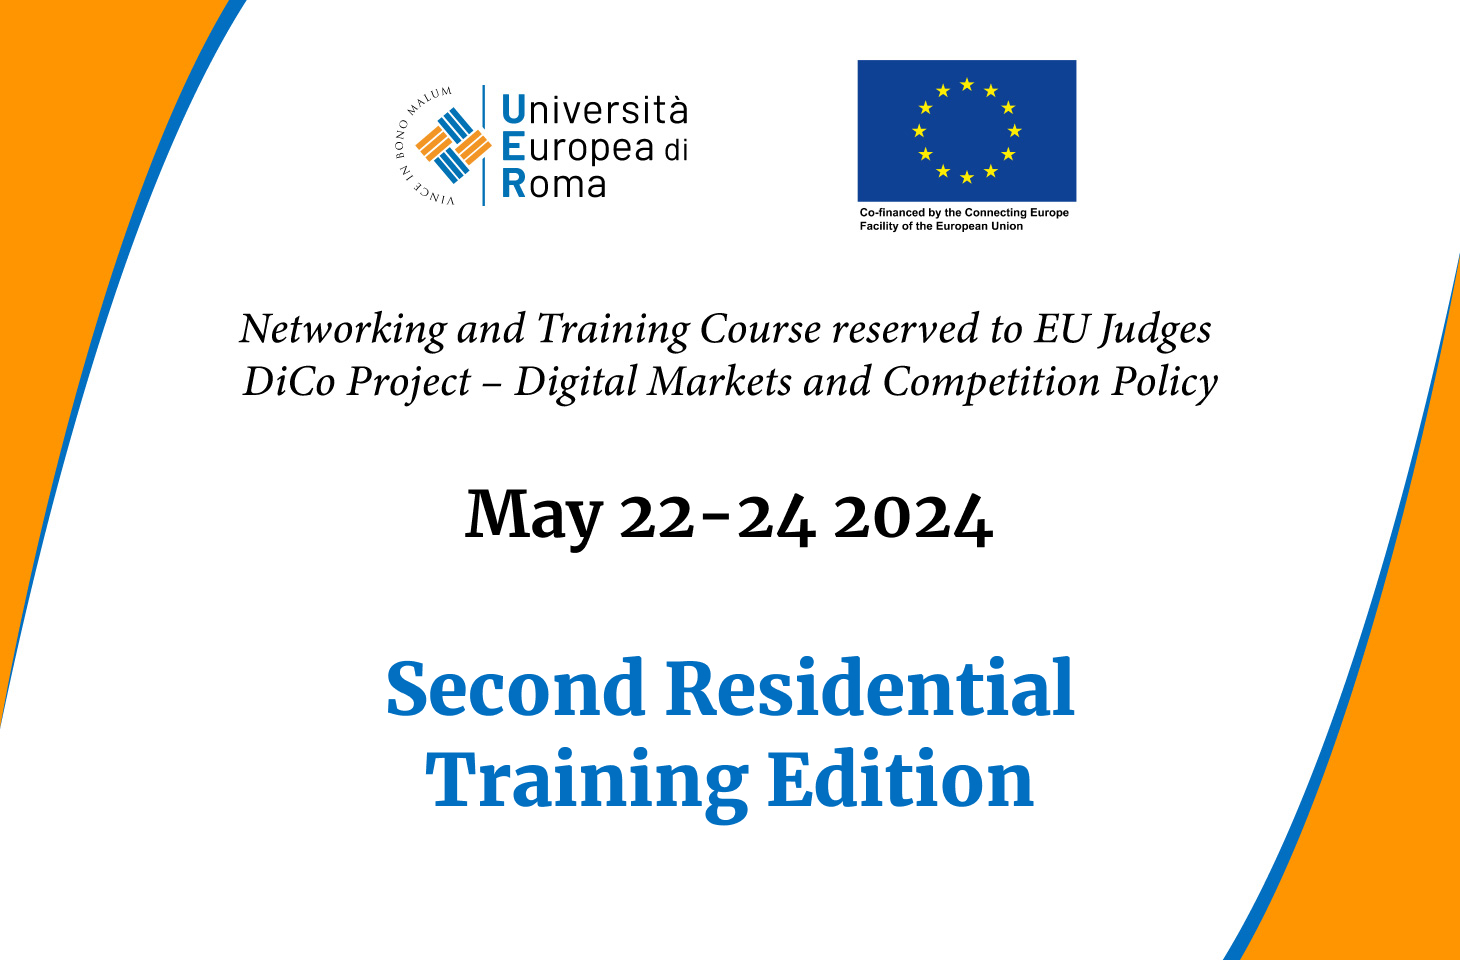 Second Residential Training Edition